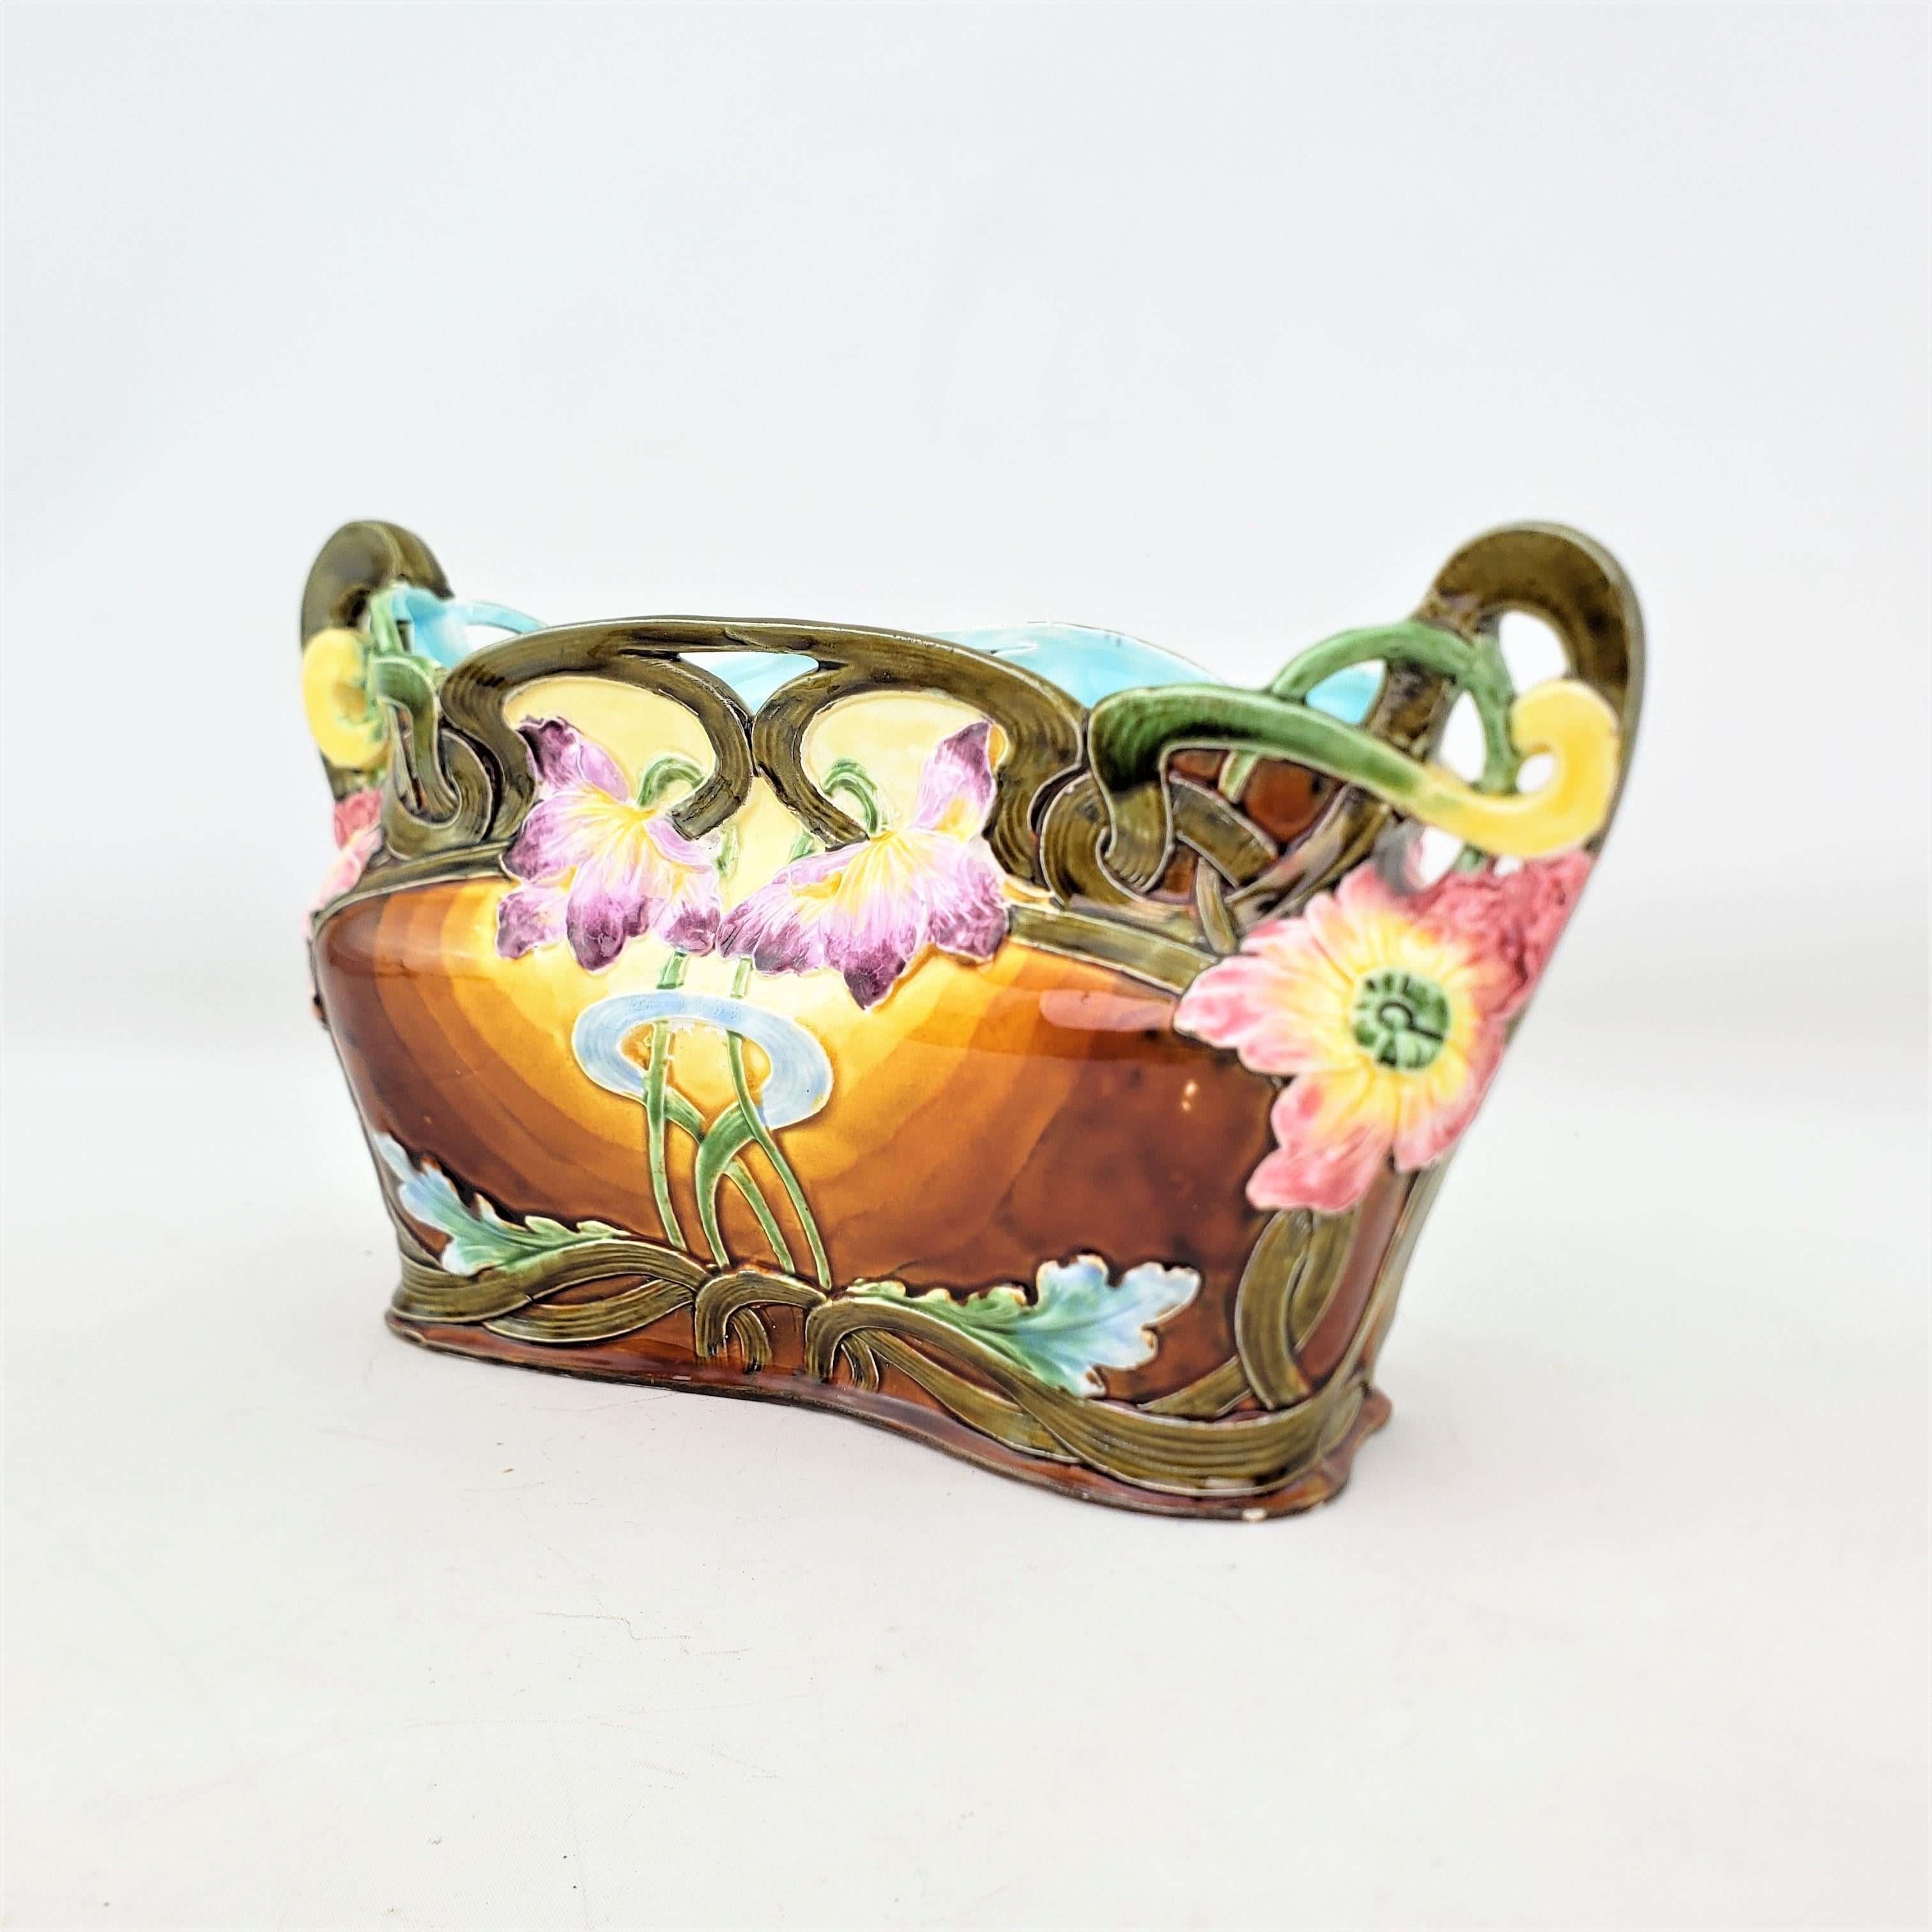 19th Century Antique English Majolica Planter or Jardiniere with Floral Decoration For Sale